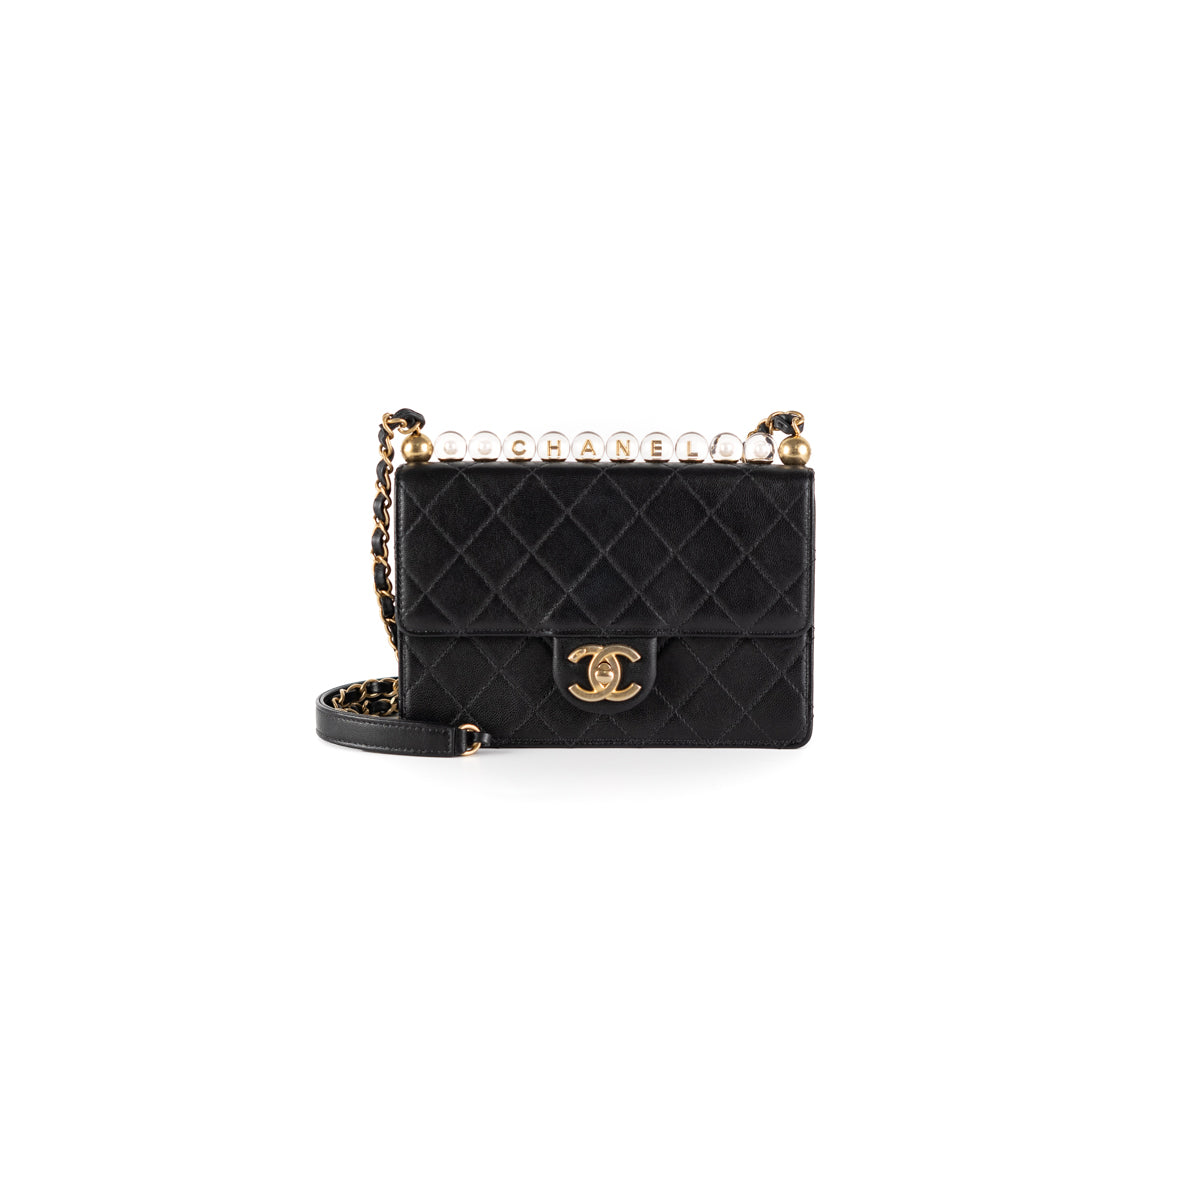 Chanel Quilted Calfskin Pearl Cross Body Bag Black - THE PURSE AFFAIR